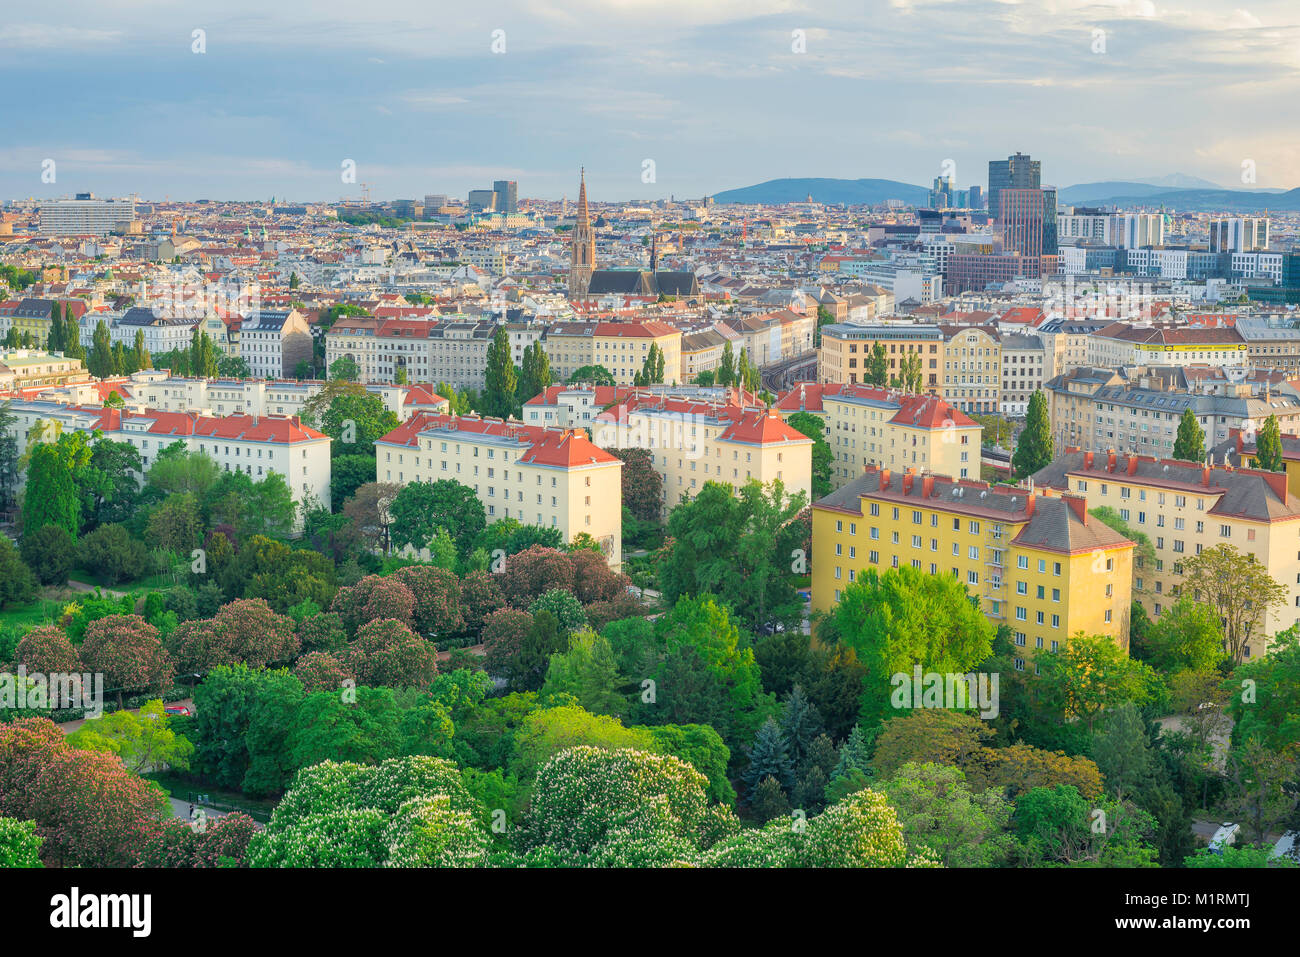 Vienna cityscape aerial, view of the skyline of Vienna with the trees of the Prater park in the foreground, Wien, Austria. Stock Photo